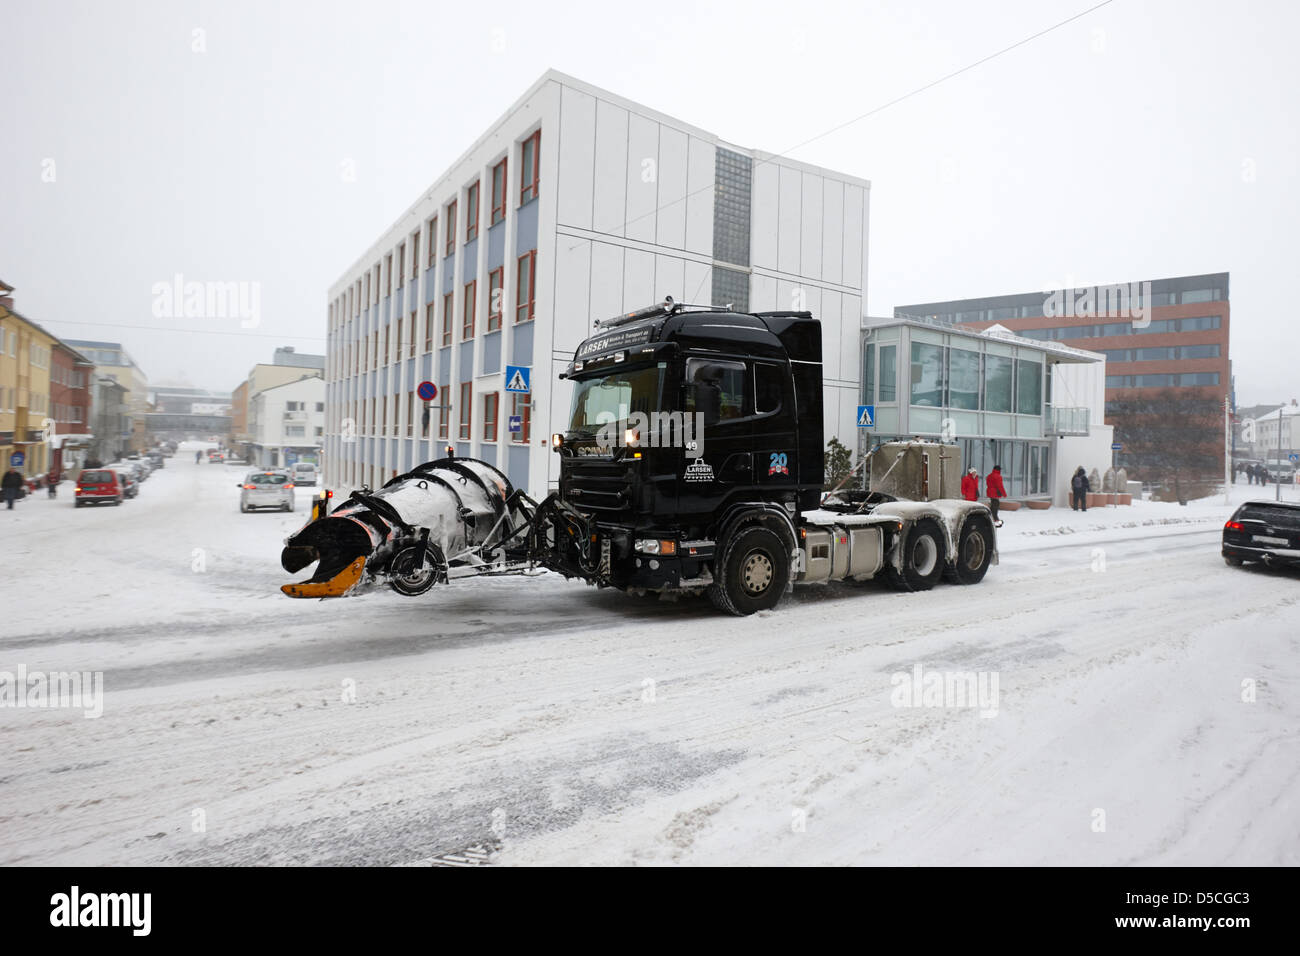 articulated lorry tractor unit fitted with snowplough attachment in hammerfest town centre finnmark norway europe Stock Photo